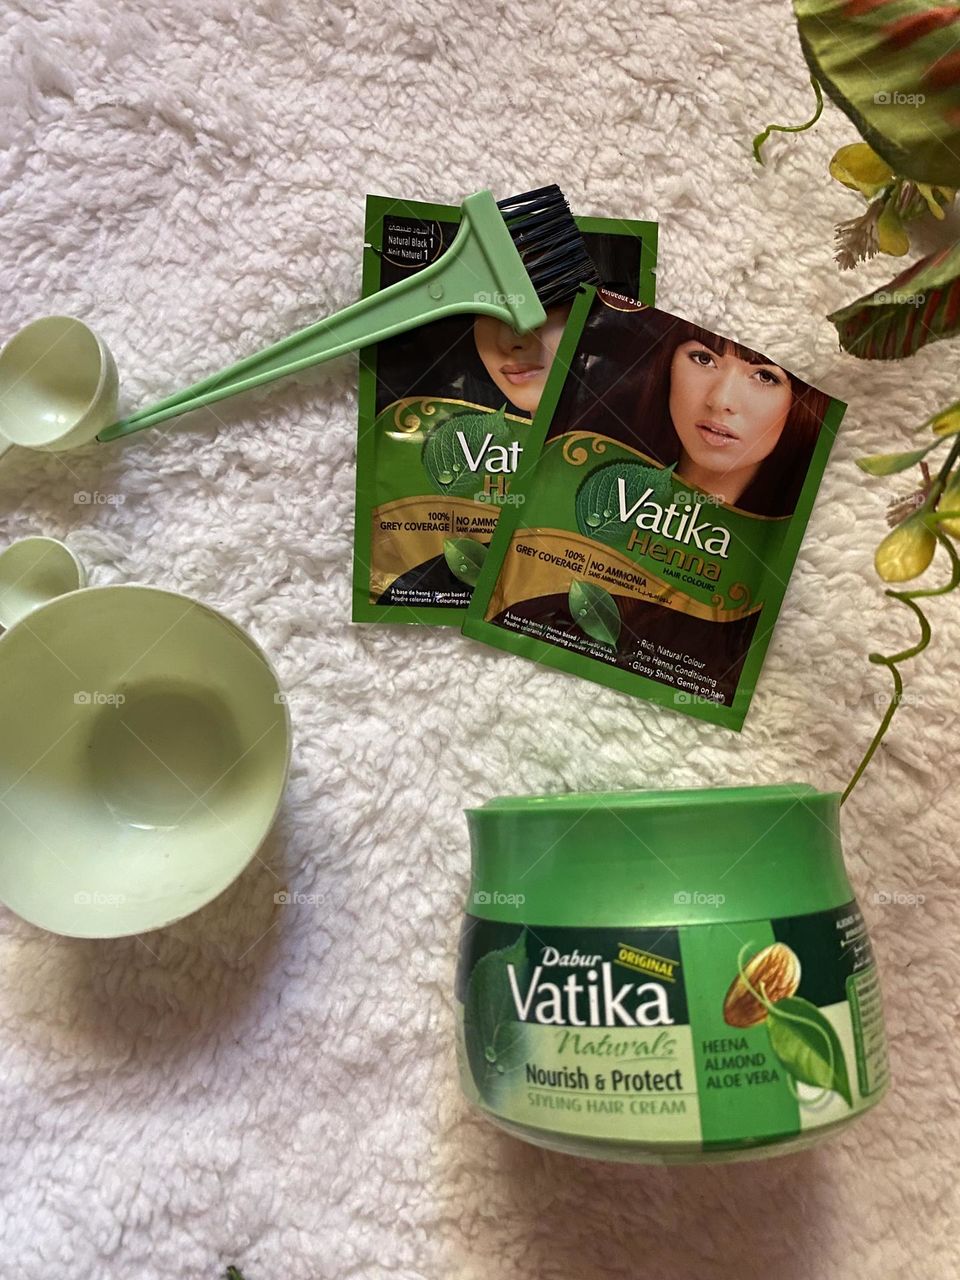 Vatika products are the best 